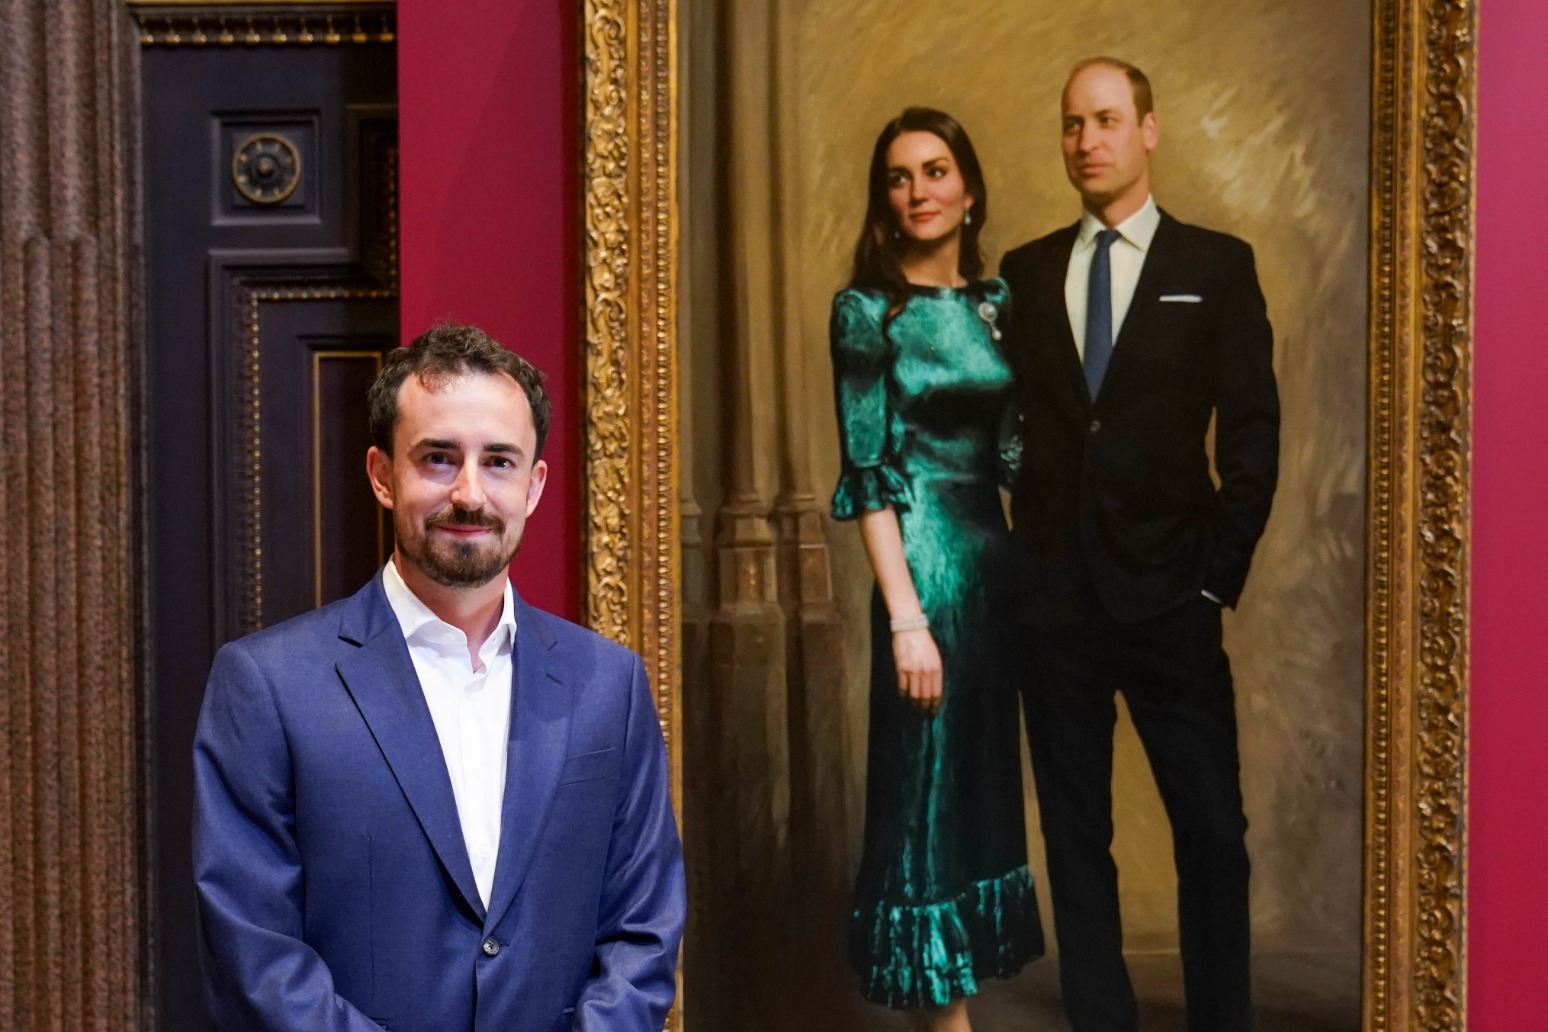 Prince William and Kate view first official joint portrait of themselves